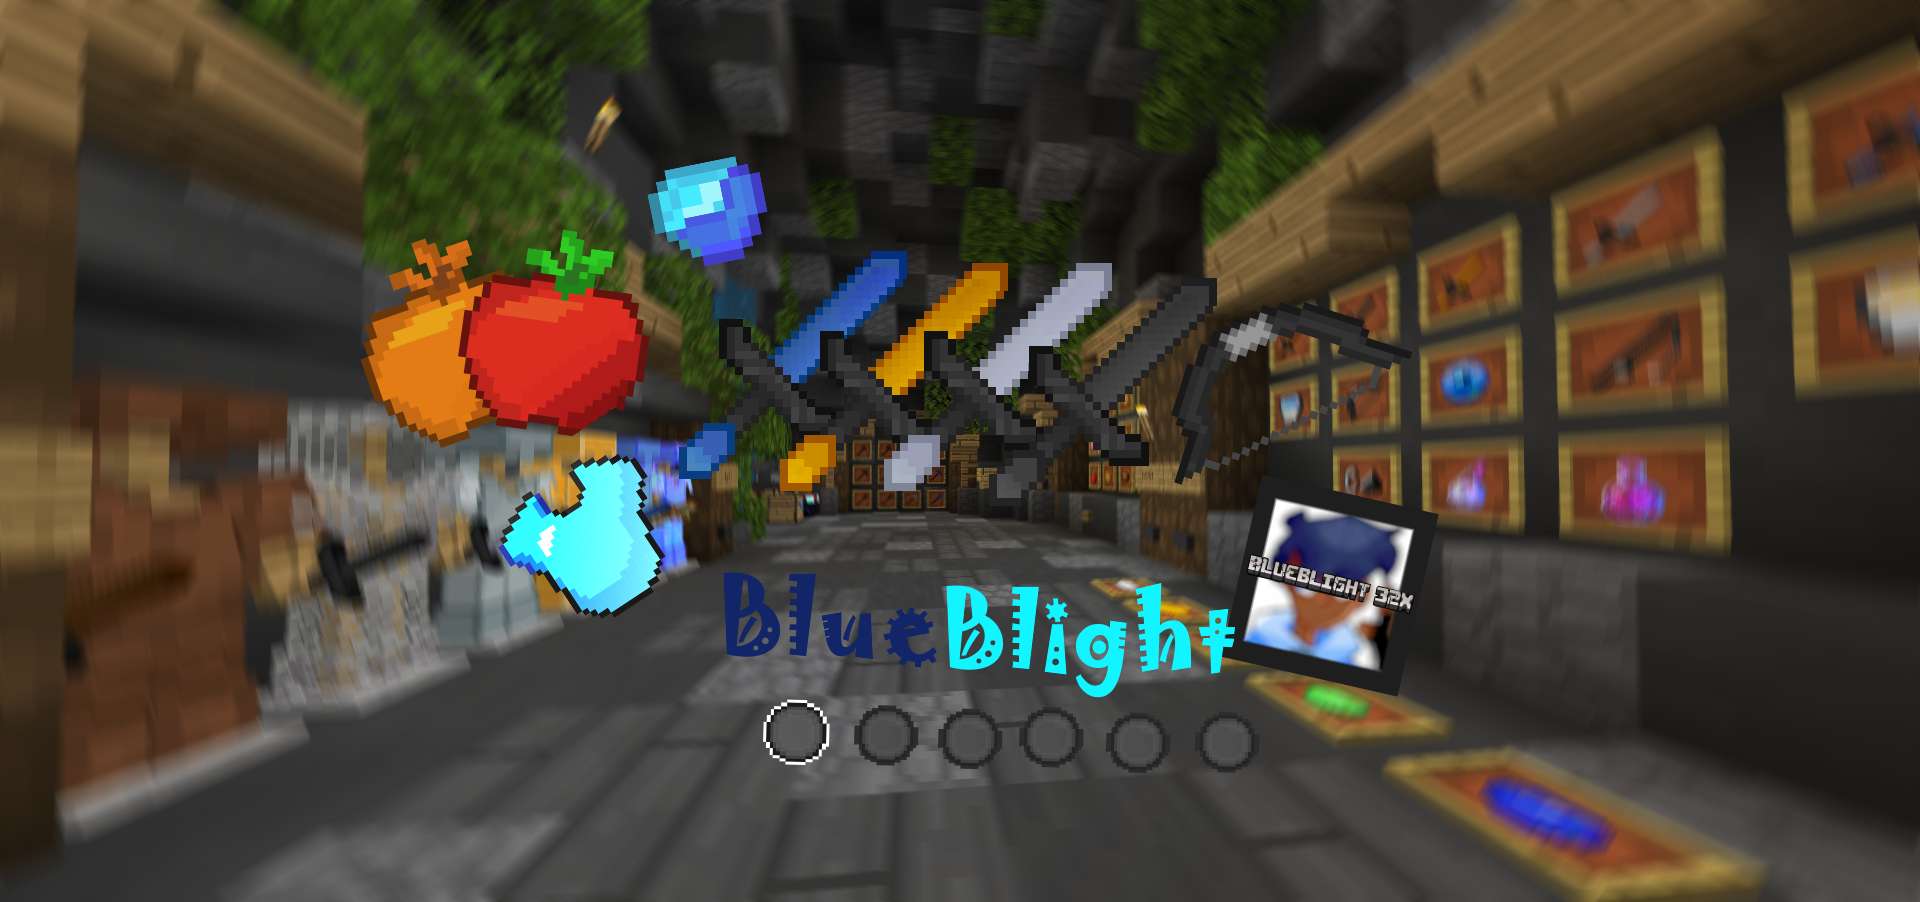 BlueBlight (Blqht 500 special pack) - 32 by ArKAH on PvPRP